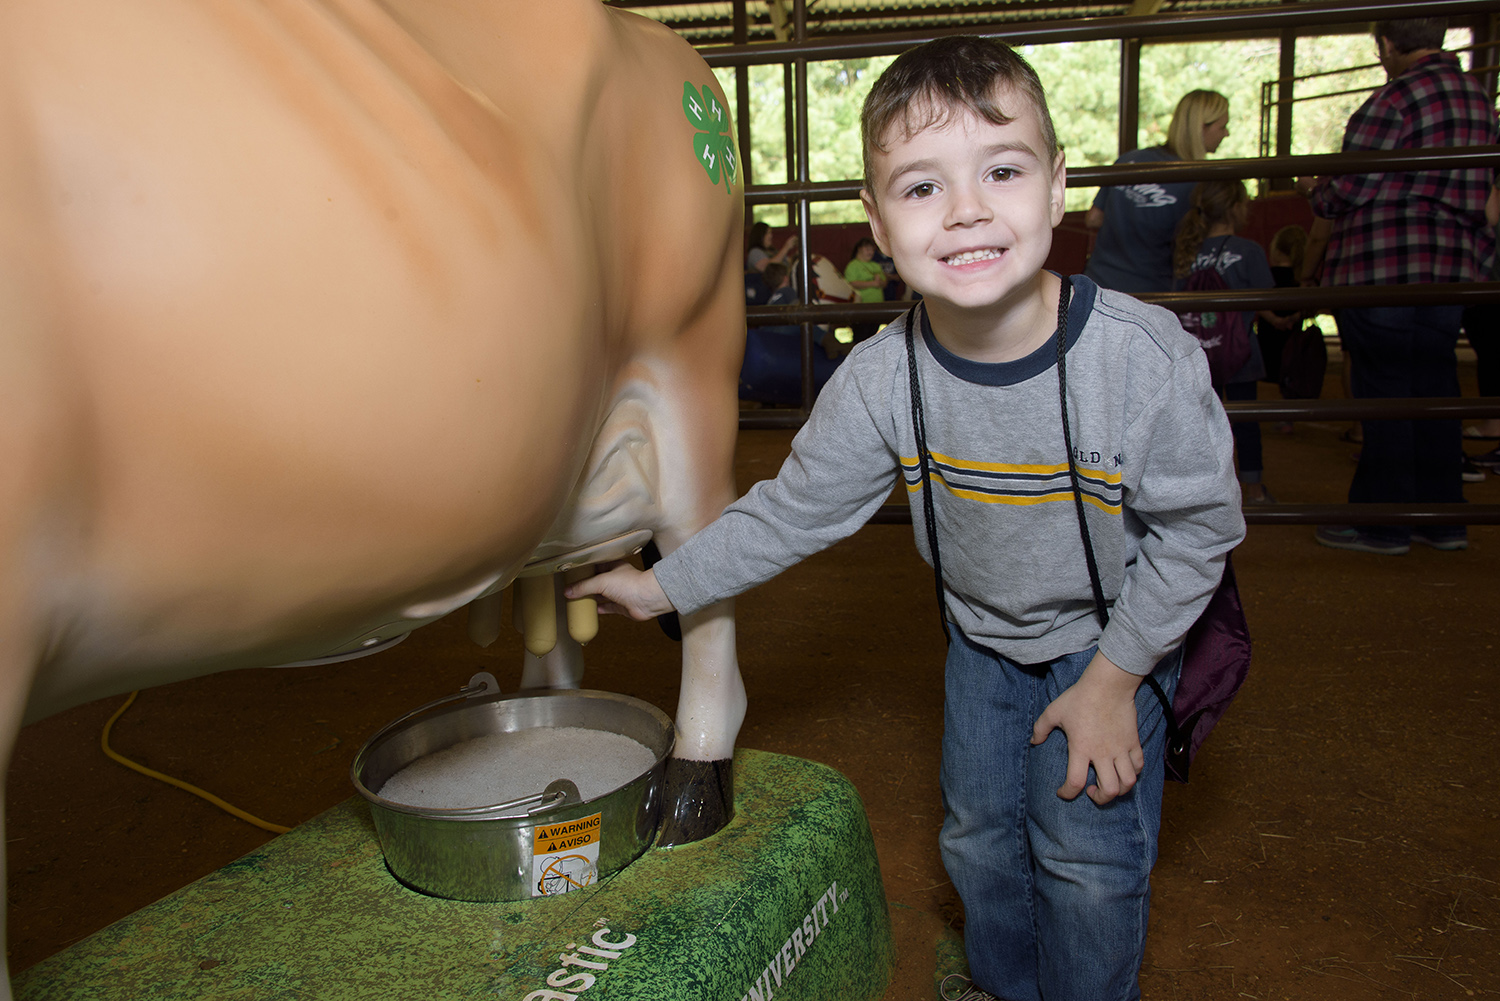 A young child squeezes the mechanical cow’s teat that simulates an udder to demonstrate the milking process. 